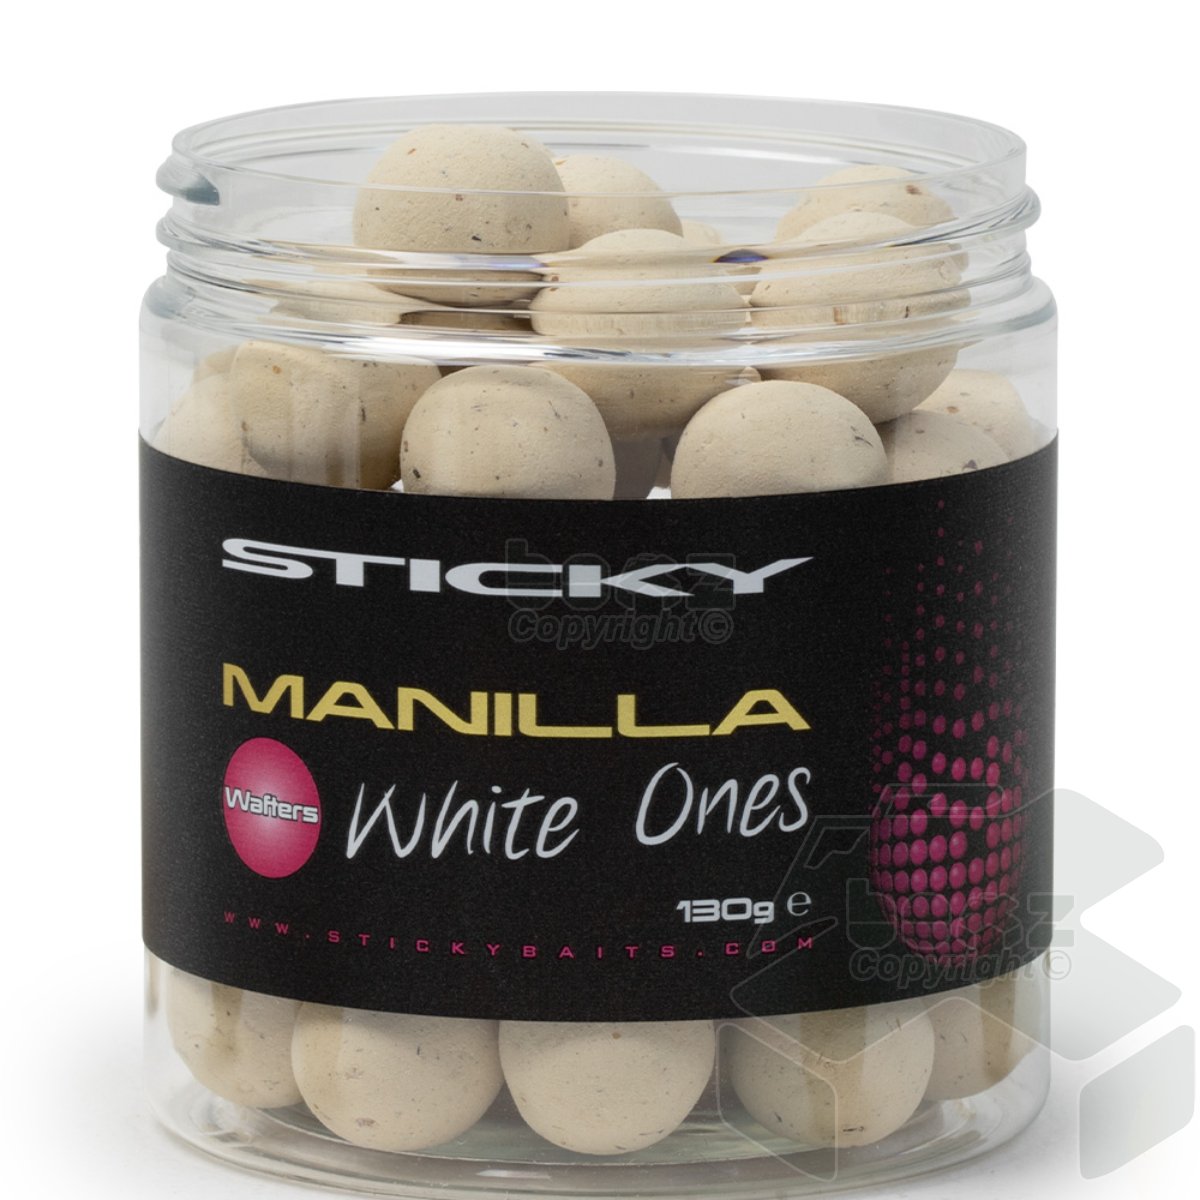 Sticky Manilla White Ones Wafters 16mm 130g Pot